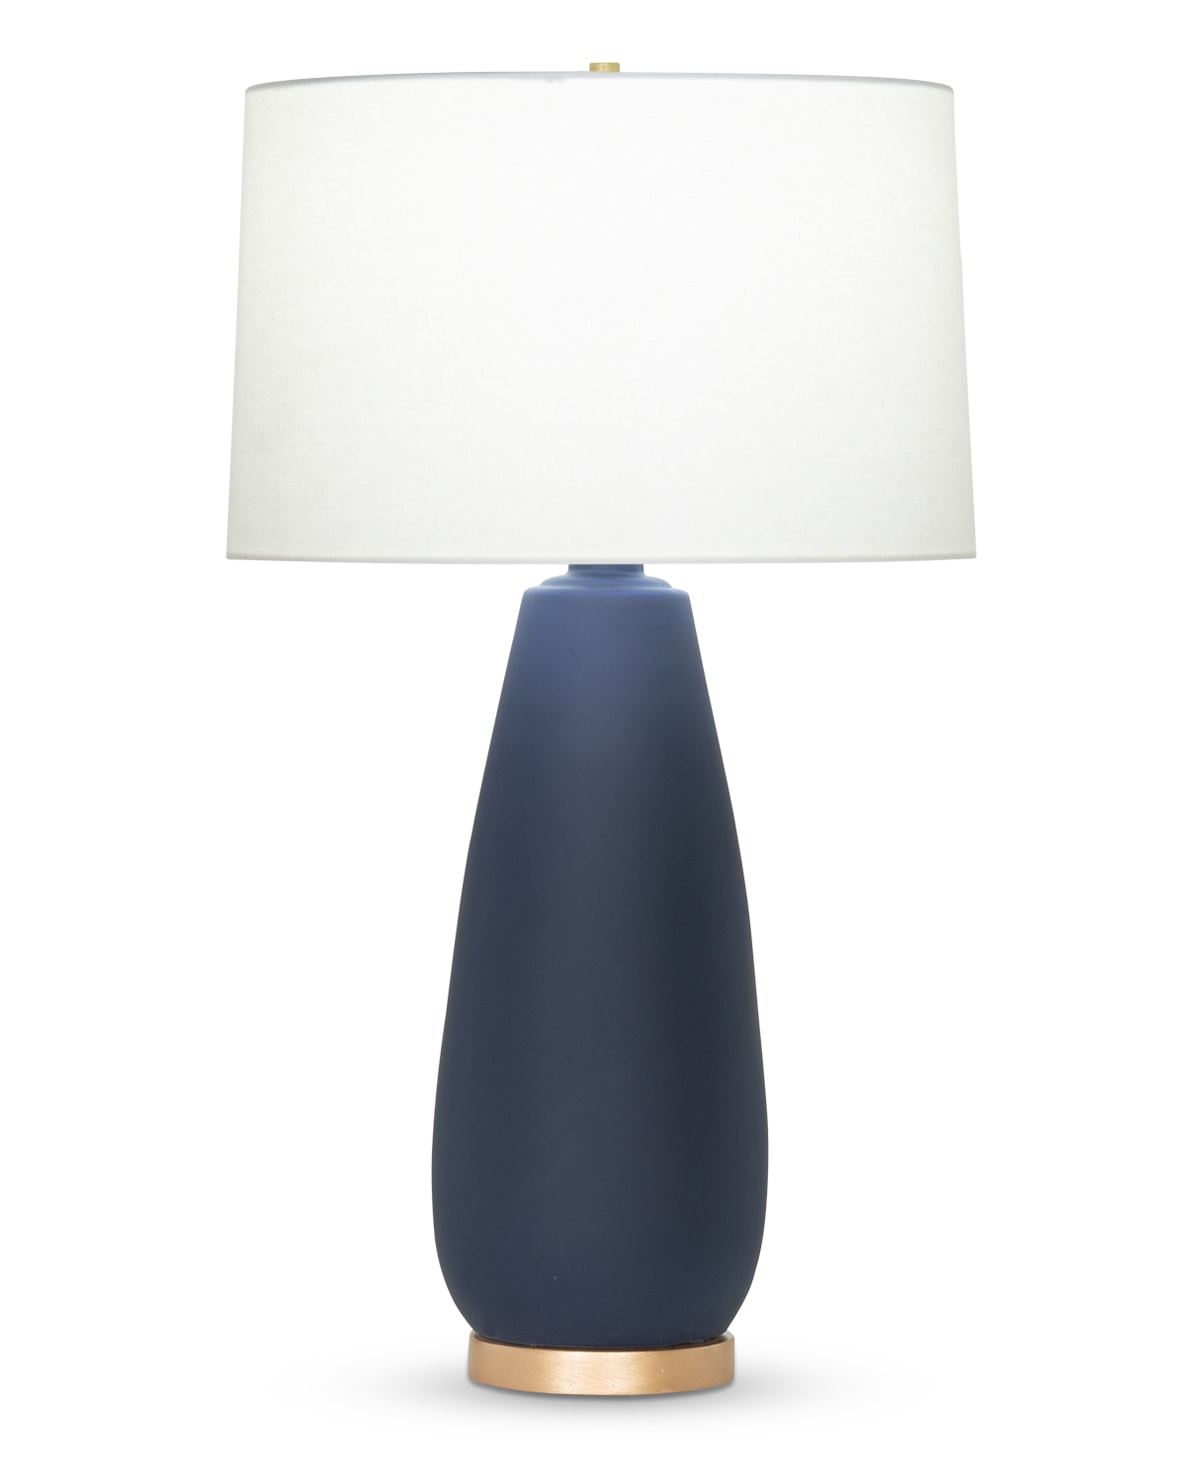 FlowDecor Duncan Table Lamp in ceramic with navy blue matte finish and resin base with gold finish and off-white linen tapered drum shade (# 4397)